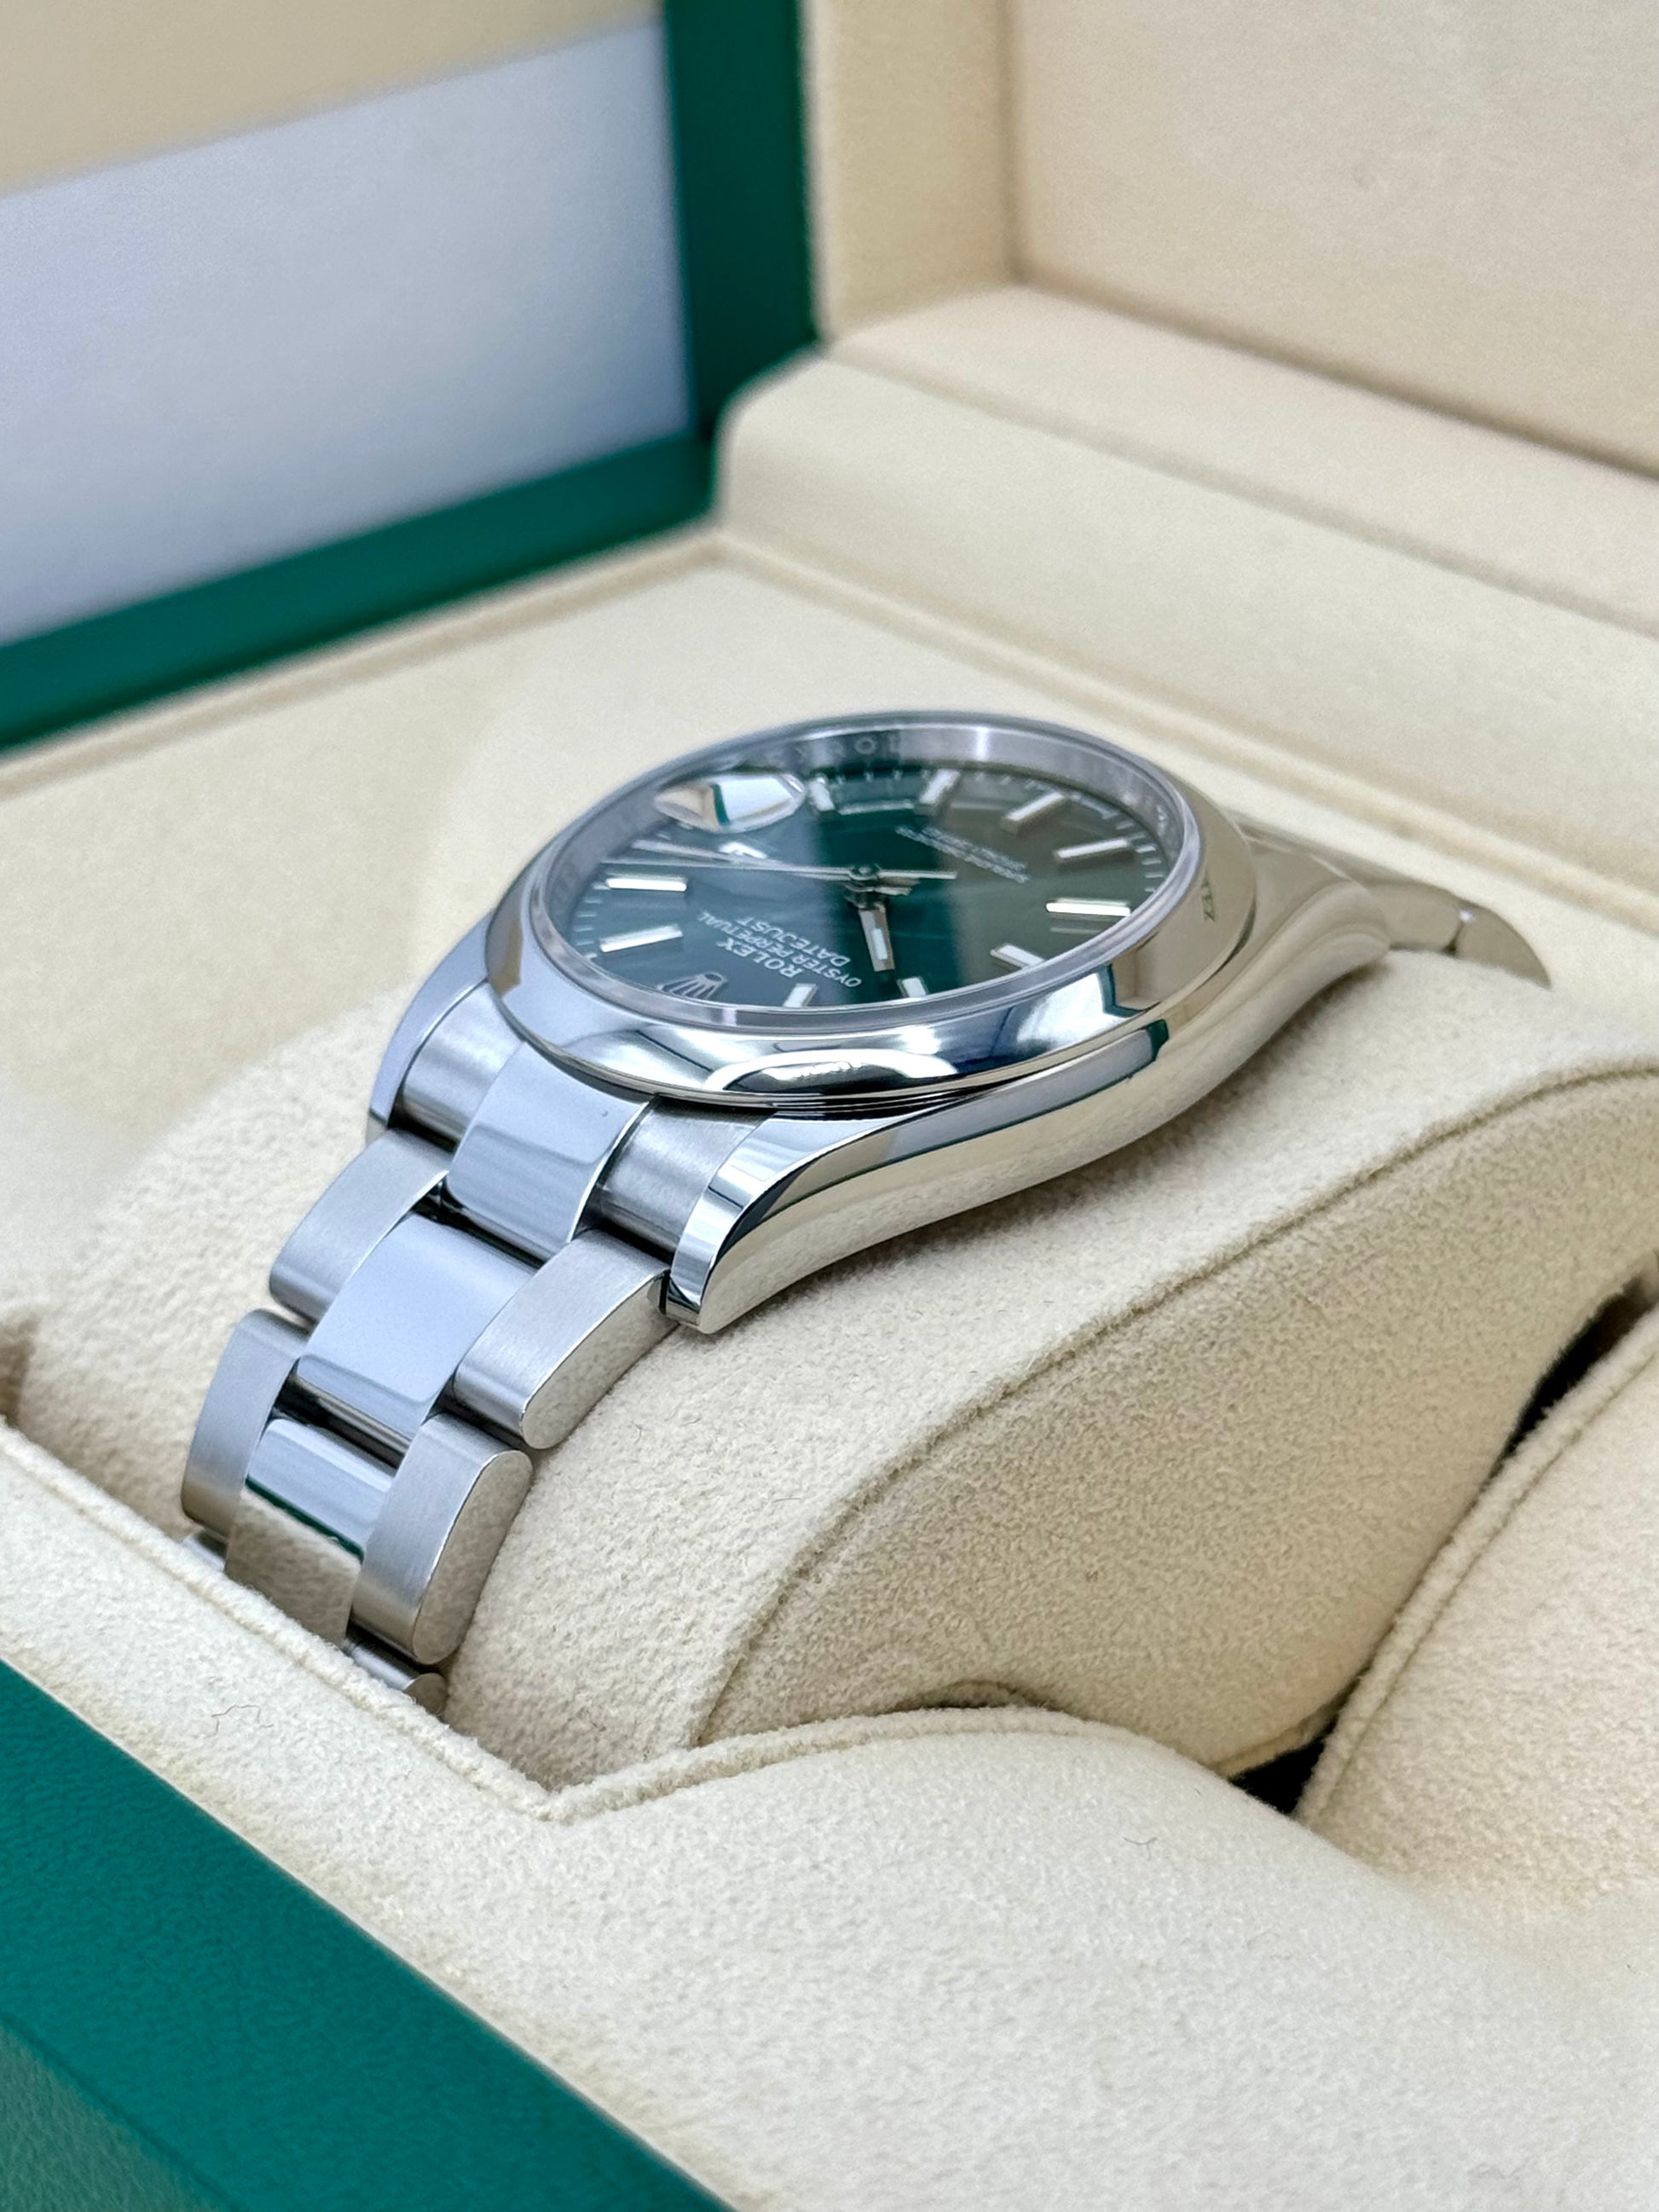 NEW 2023 Rolex Datejust 36mm 126200 Steel Oyster Mint Green Dial - MyWatchLLC